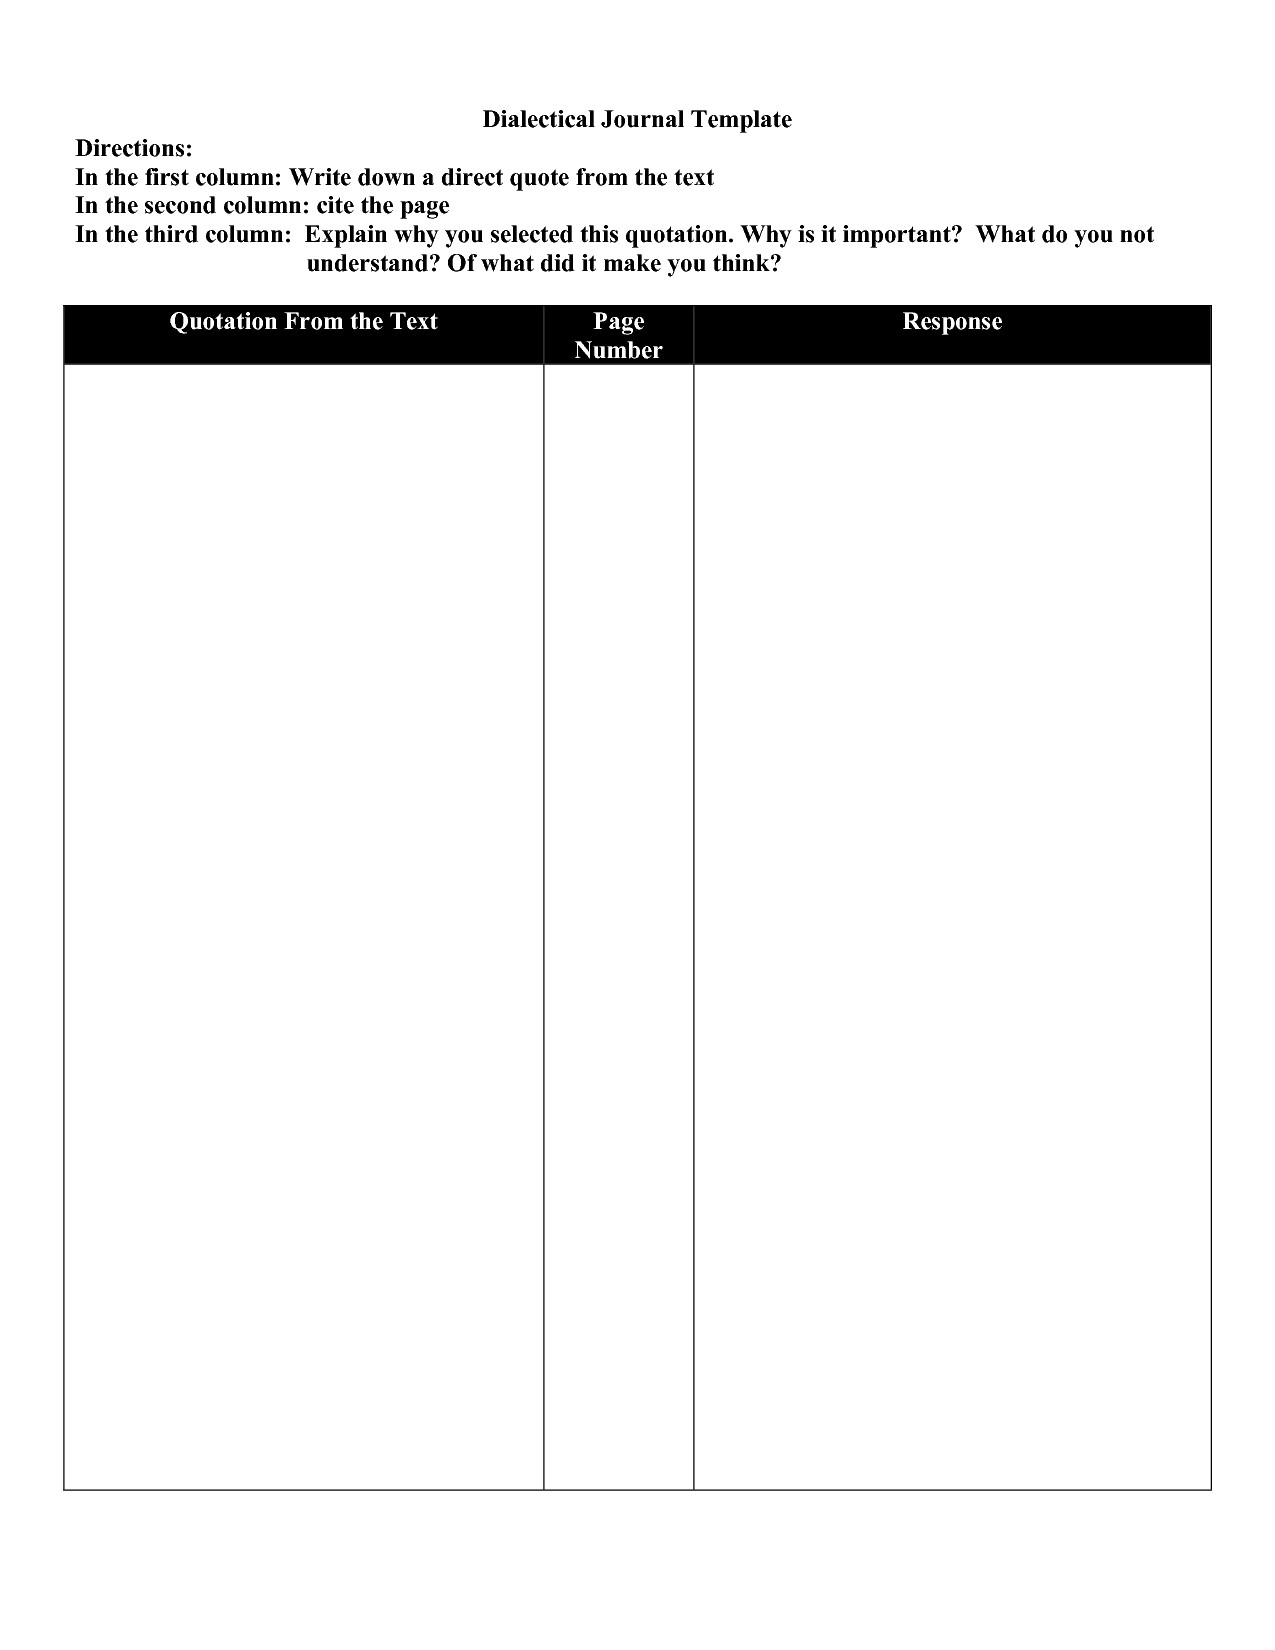 Microsoft Word Journal Templates Dialectical Journal Template